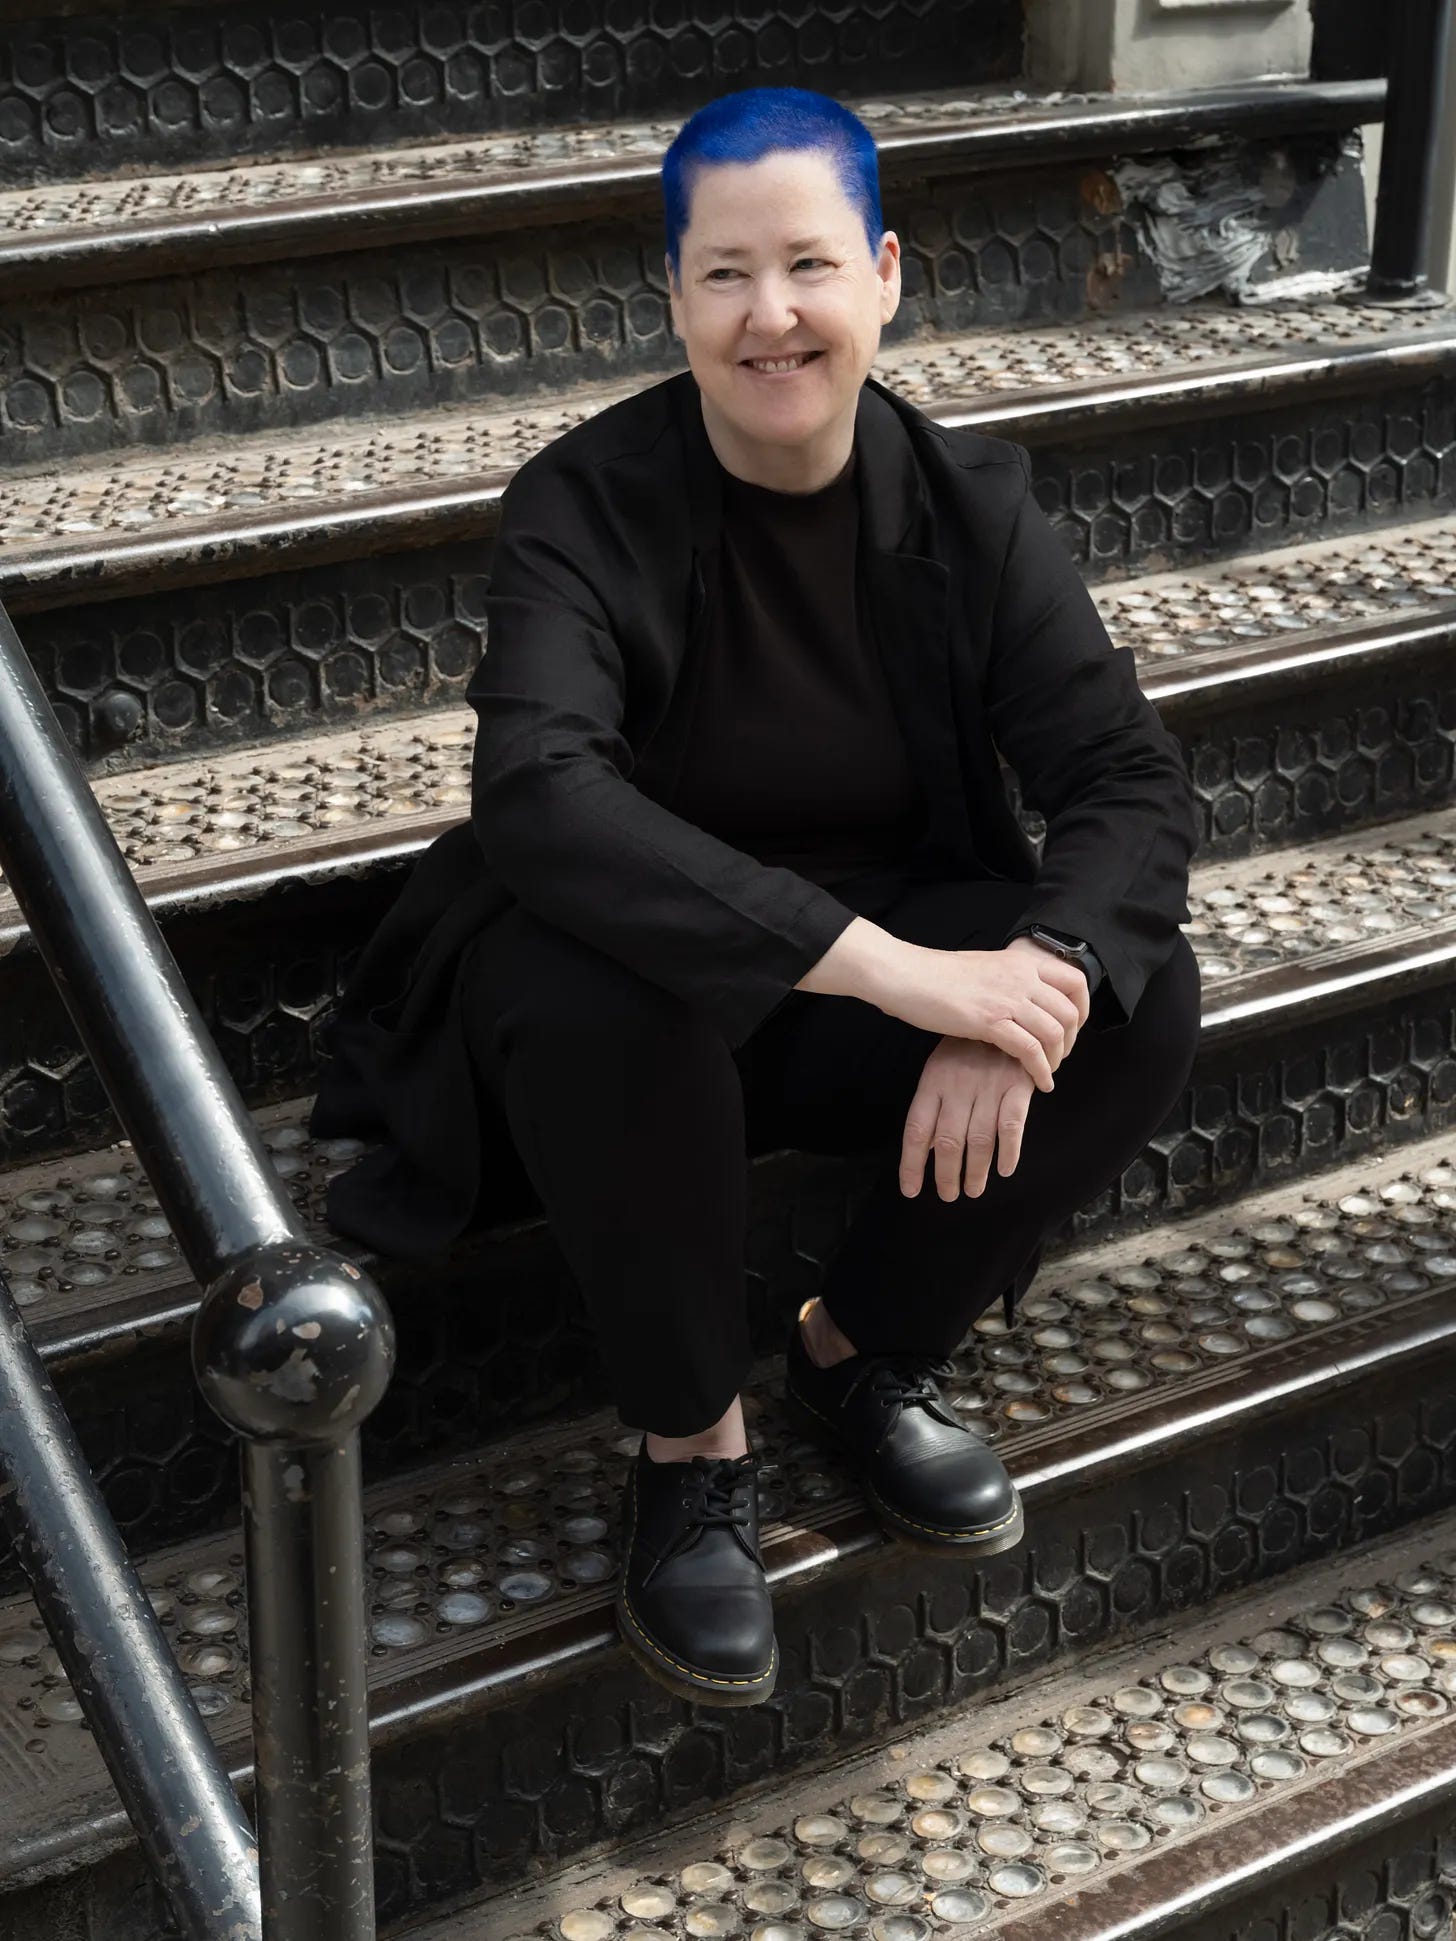 Photograph of Sal Randolph, a white woman with very short, very blue hair. She is sitting on old cast-iron steps in Soho, New York, and smiling.